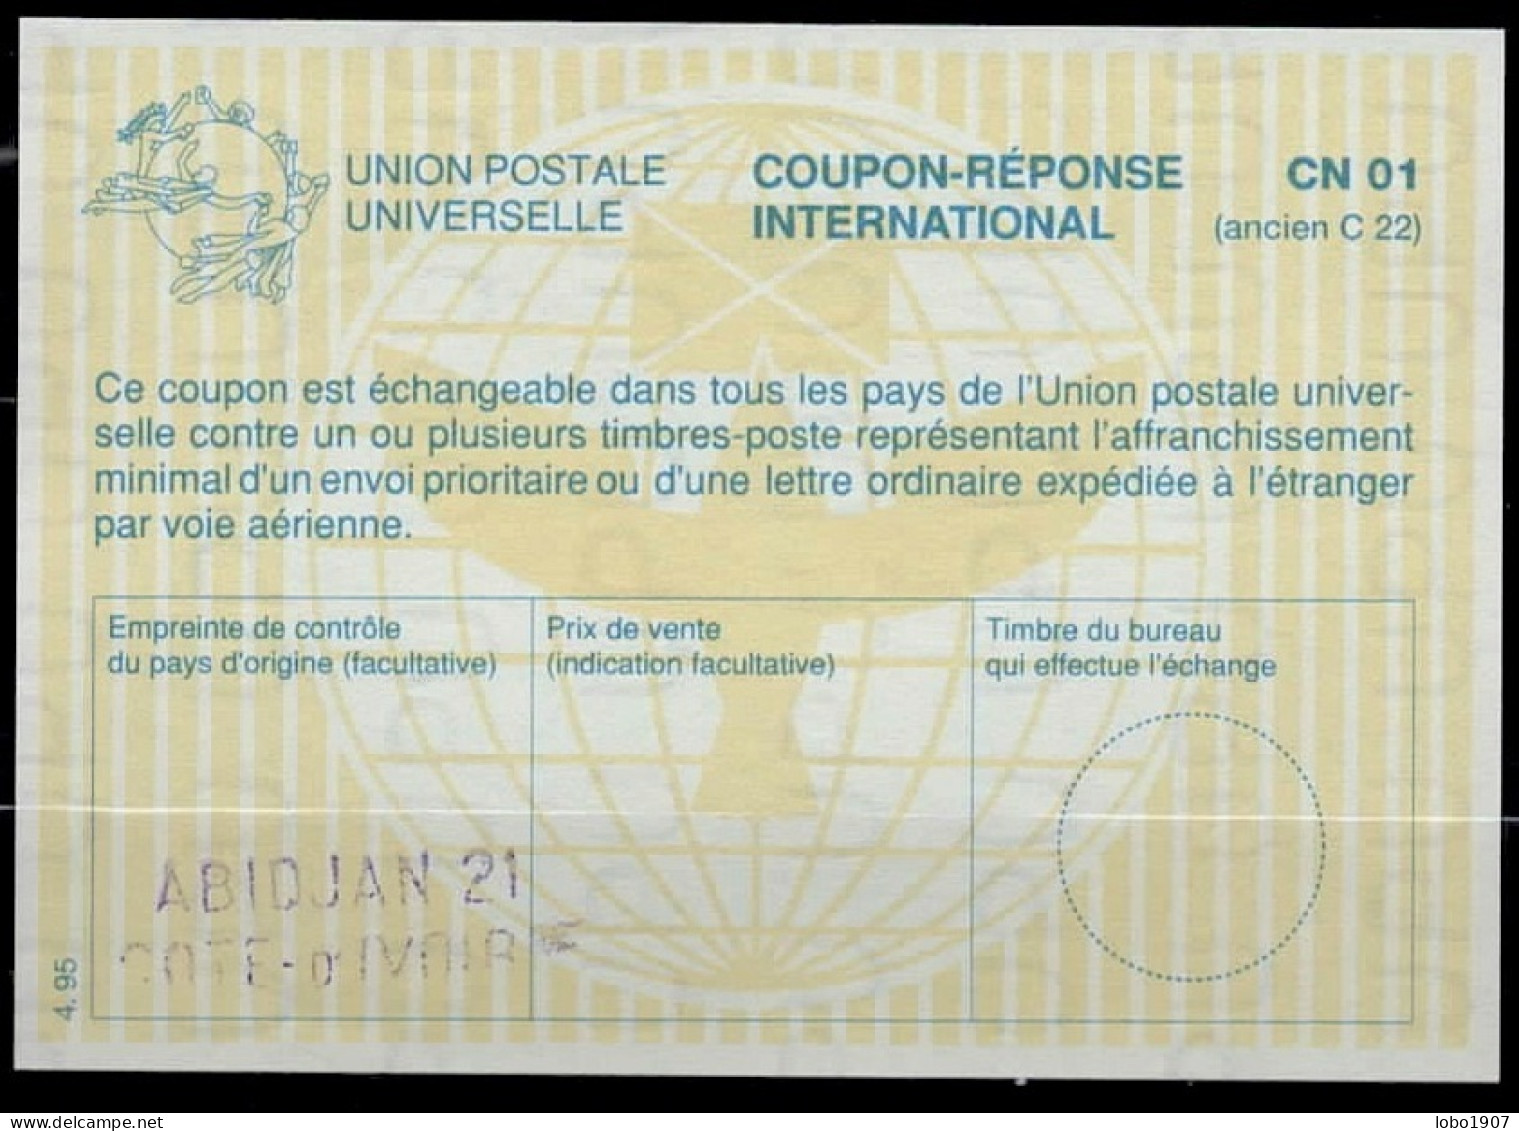 CÔTE D'IVOIRE IVORY COAST  La29  Int. Reply Coupon Reponse Antwortschein IRC IAS O Violet ABIDJAN 21 / CÔTE D'IVOIRE - Ivory Coast (1960-...)